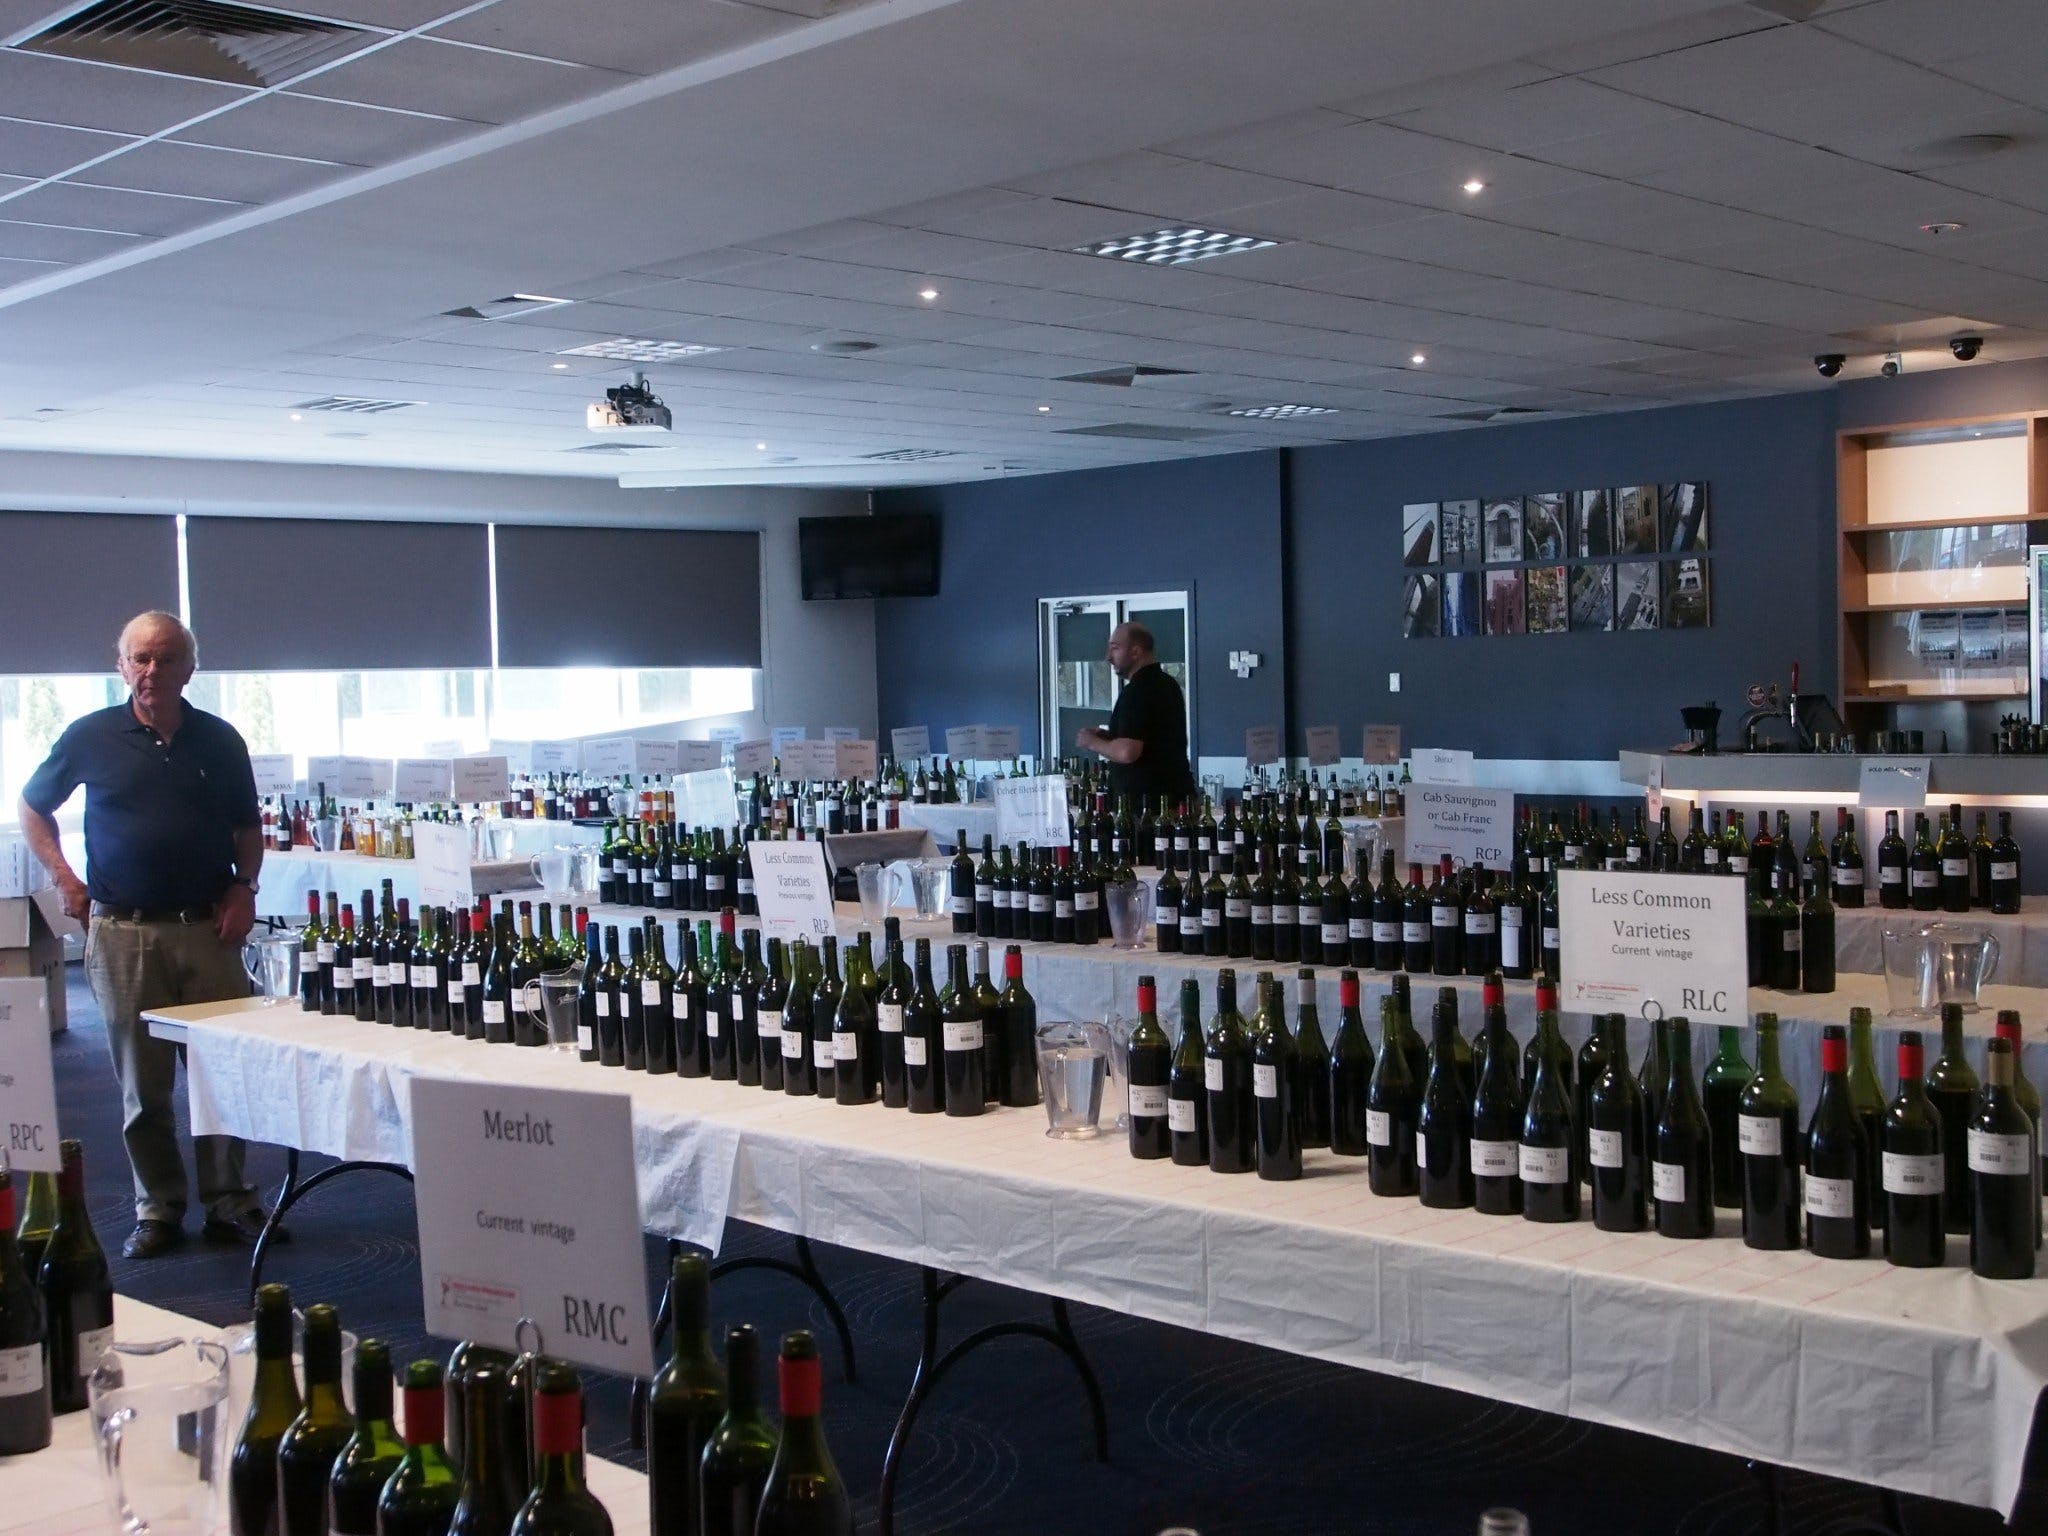 Eltham and District Wine Guild Annual Wine Show - 51st Annual Show - Surfers Gold Coast